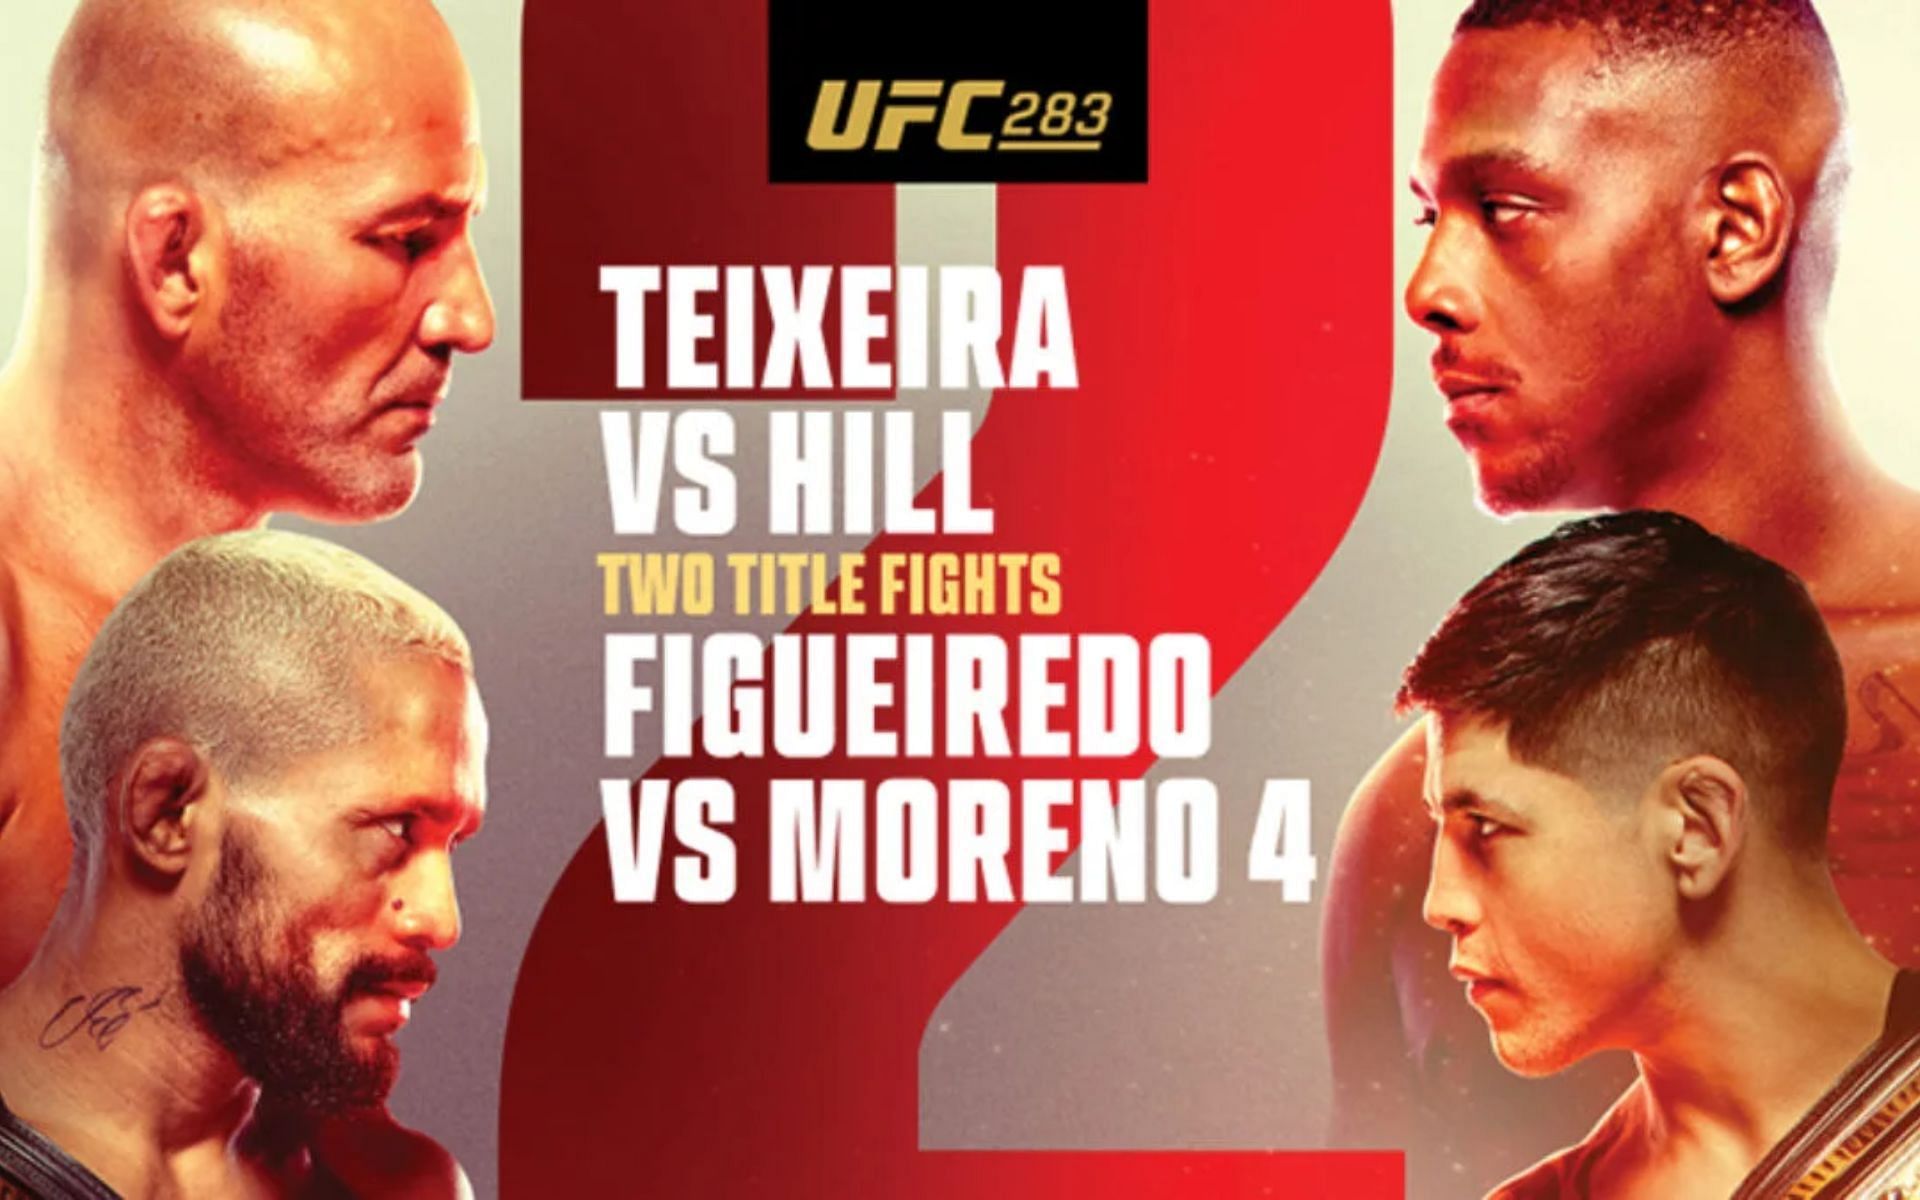 The UFC returns to Brazil this weekend for a major pay-per-view